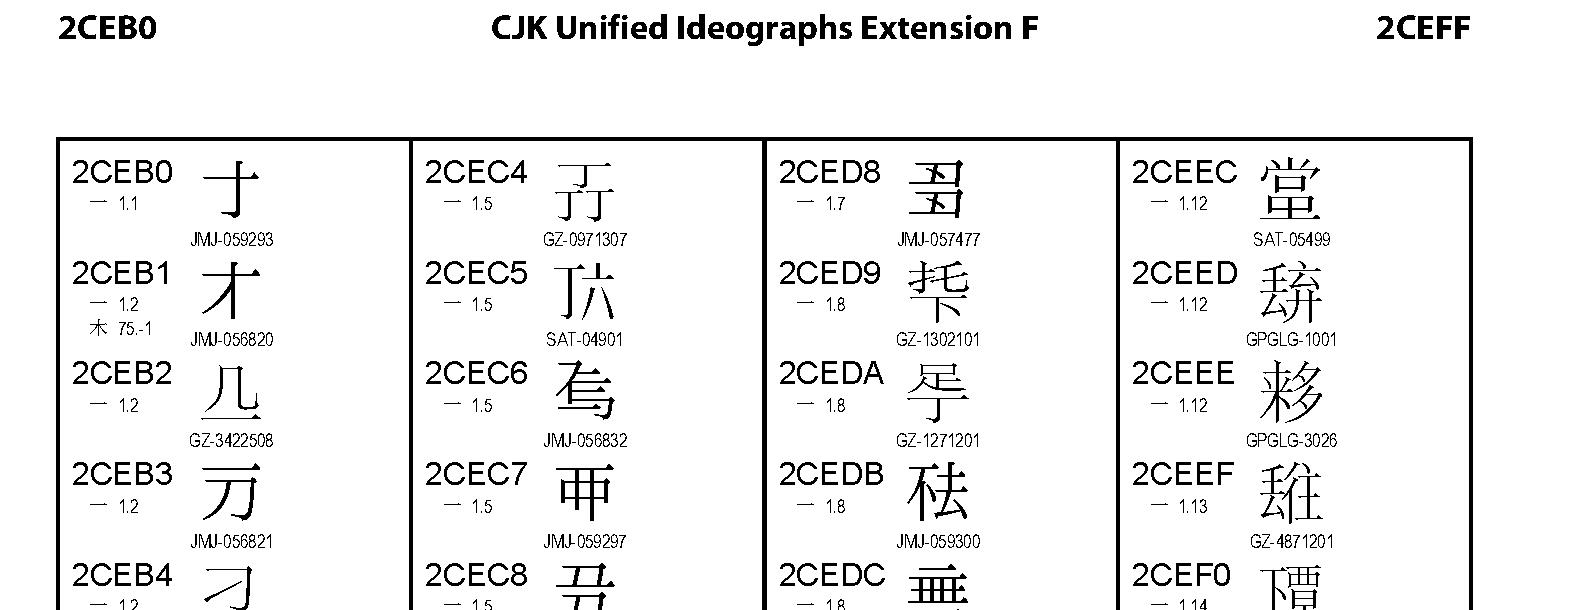 Unicode - CJK Unified Ideographs Extension F